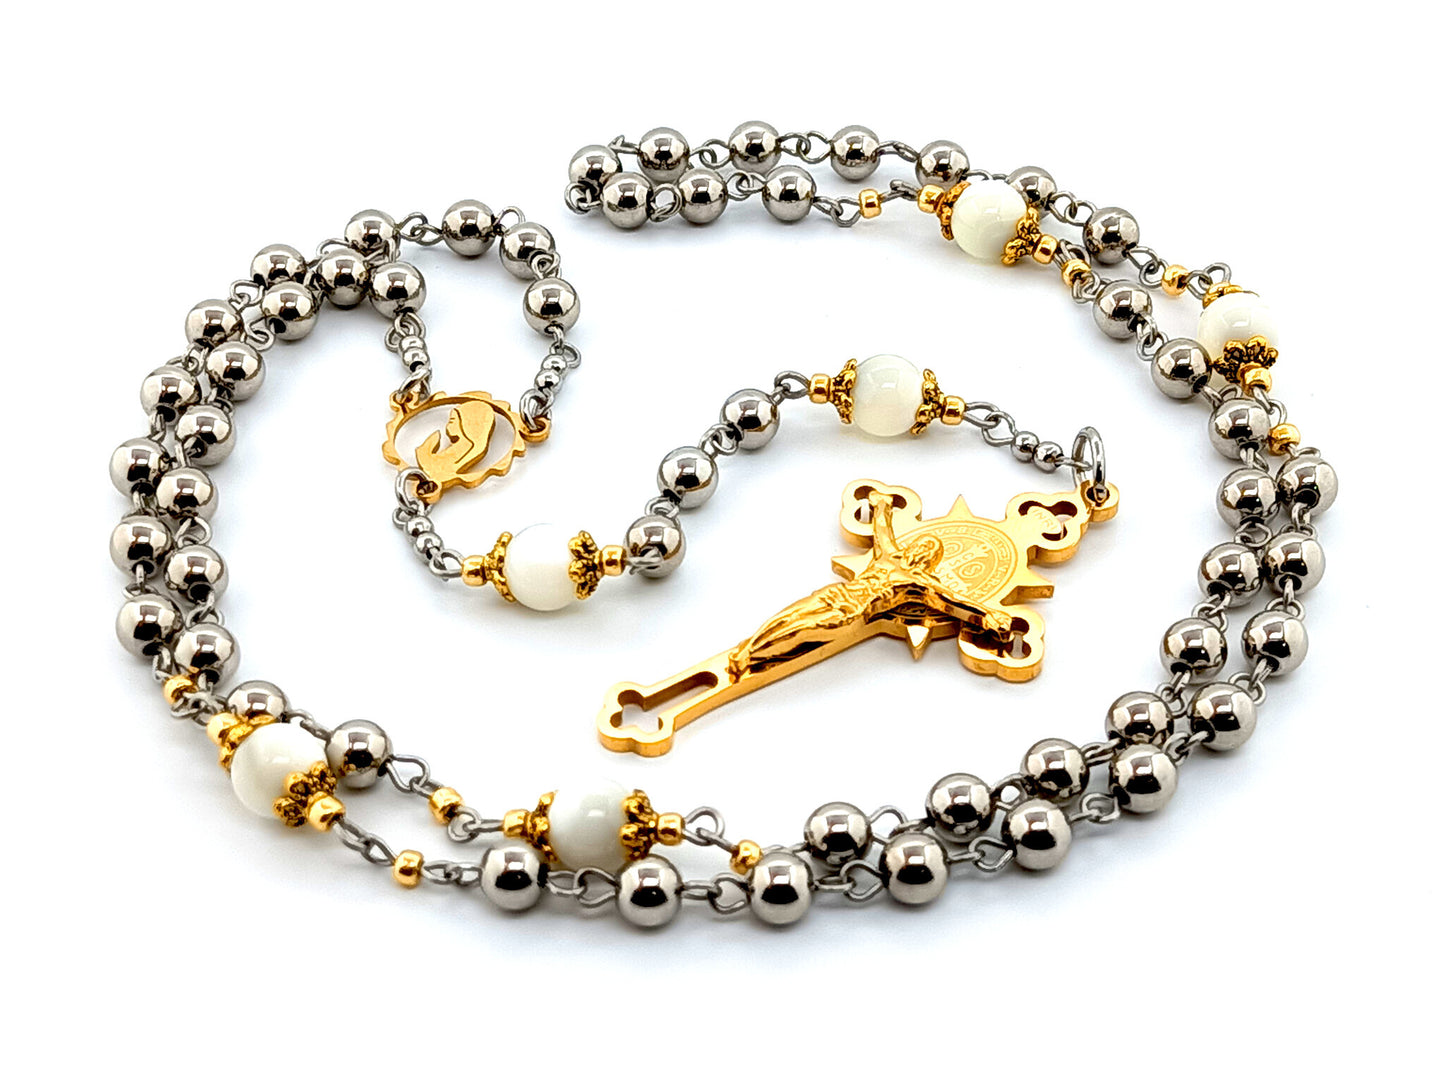 Virgin Mary unique rosary beads with mother of pearl gemstone and stainless steel beads and engraved Saint Benedict stainless steel crucifix.